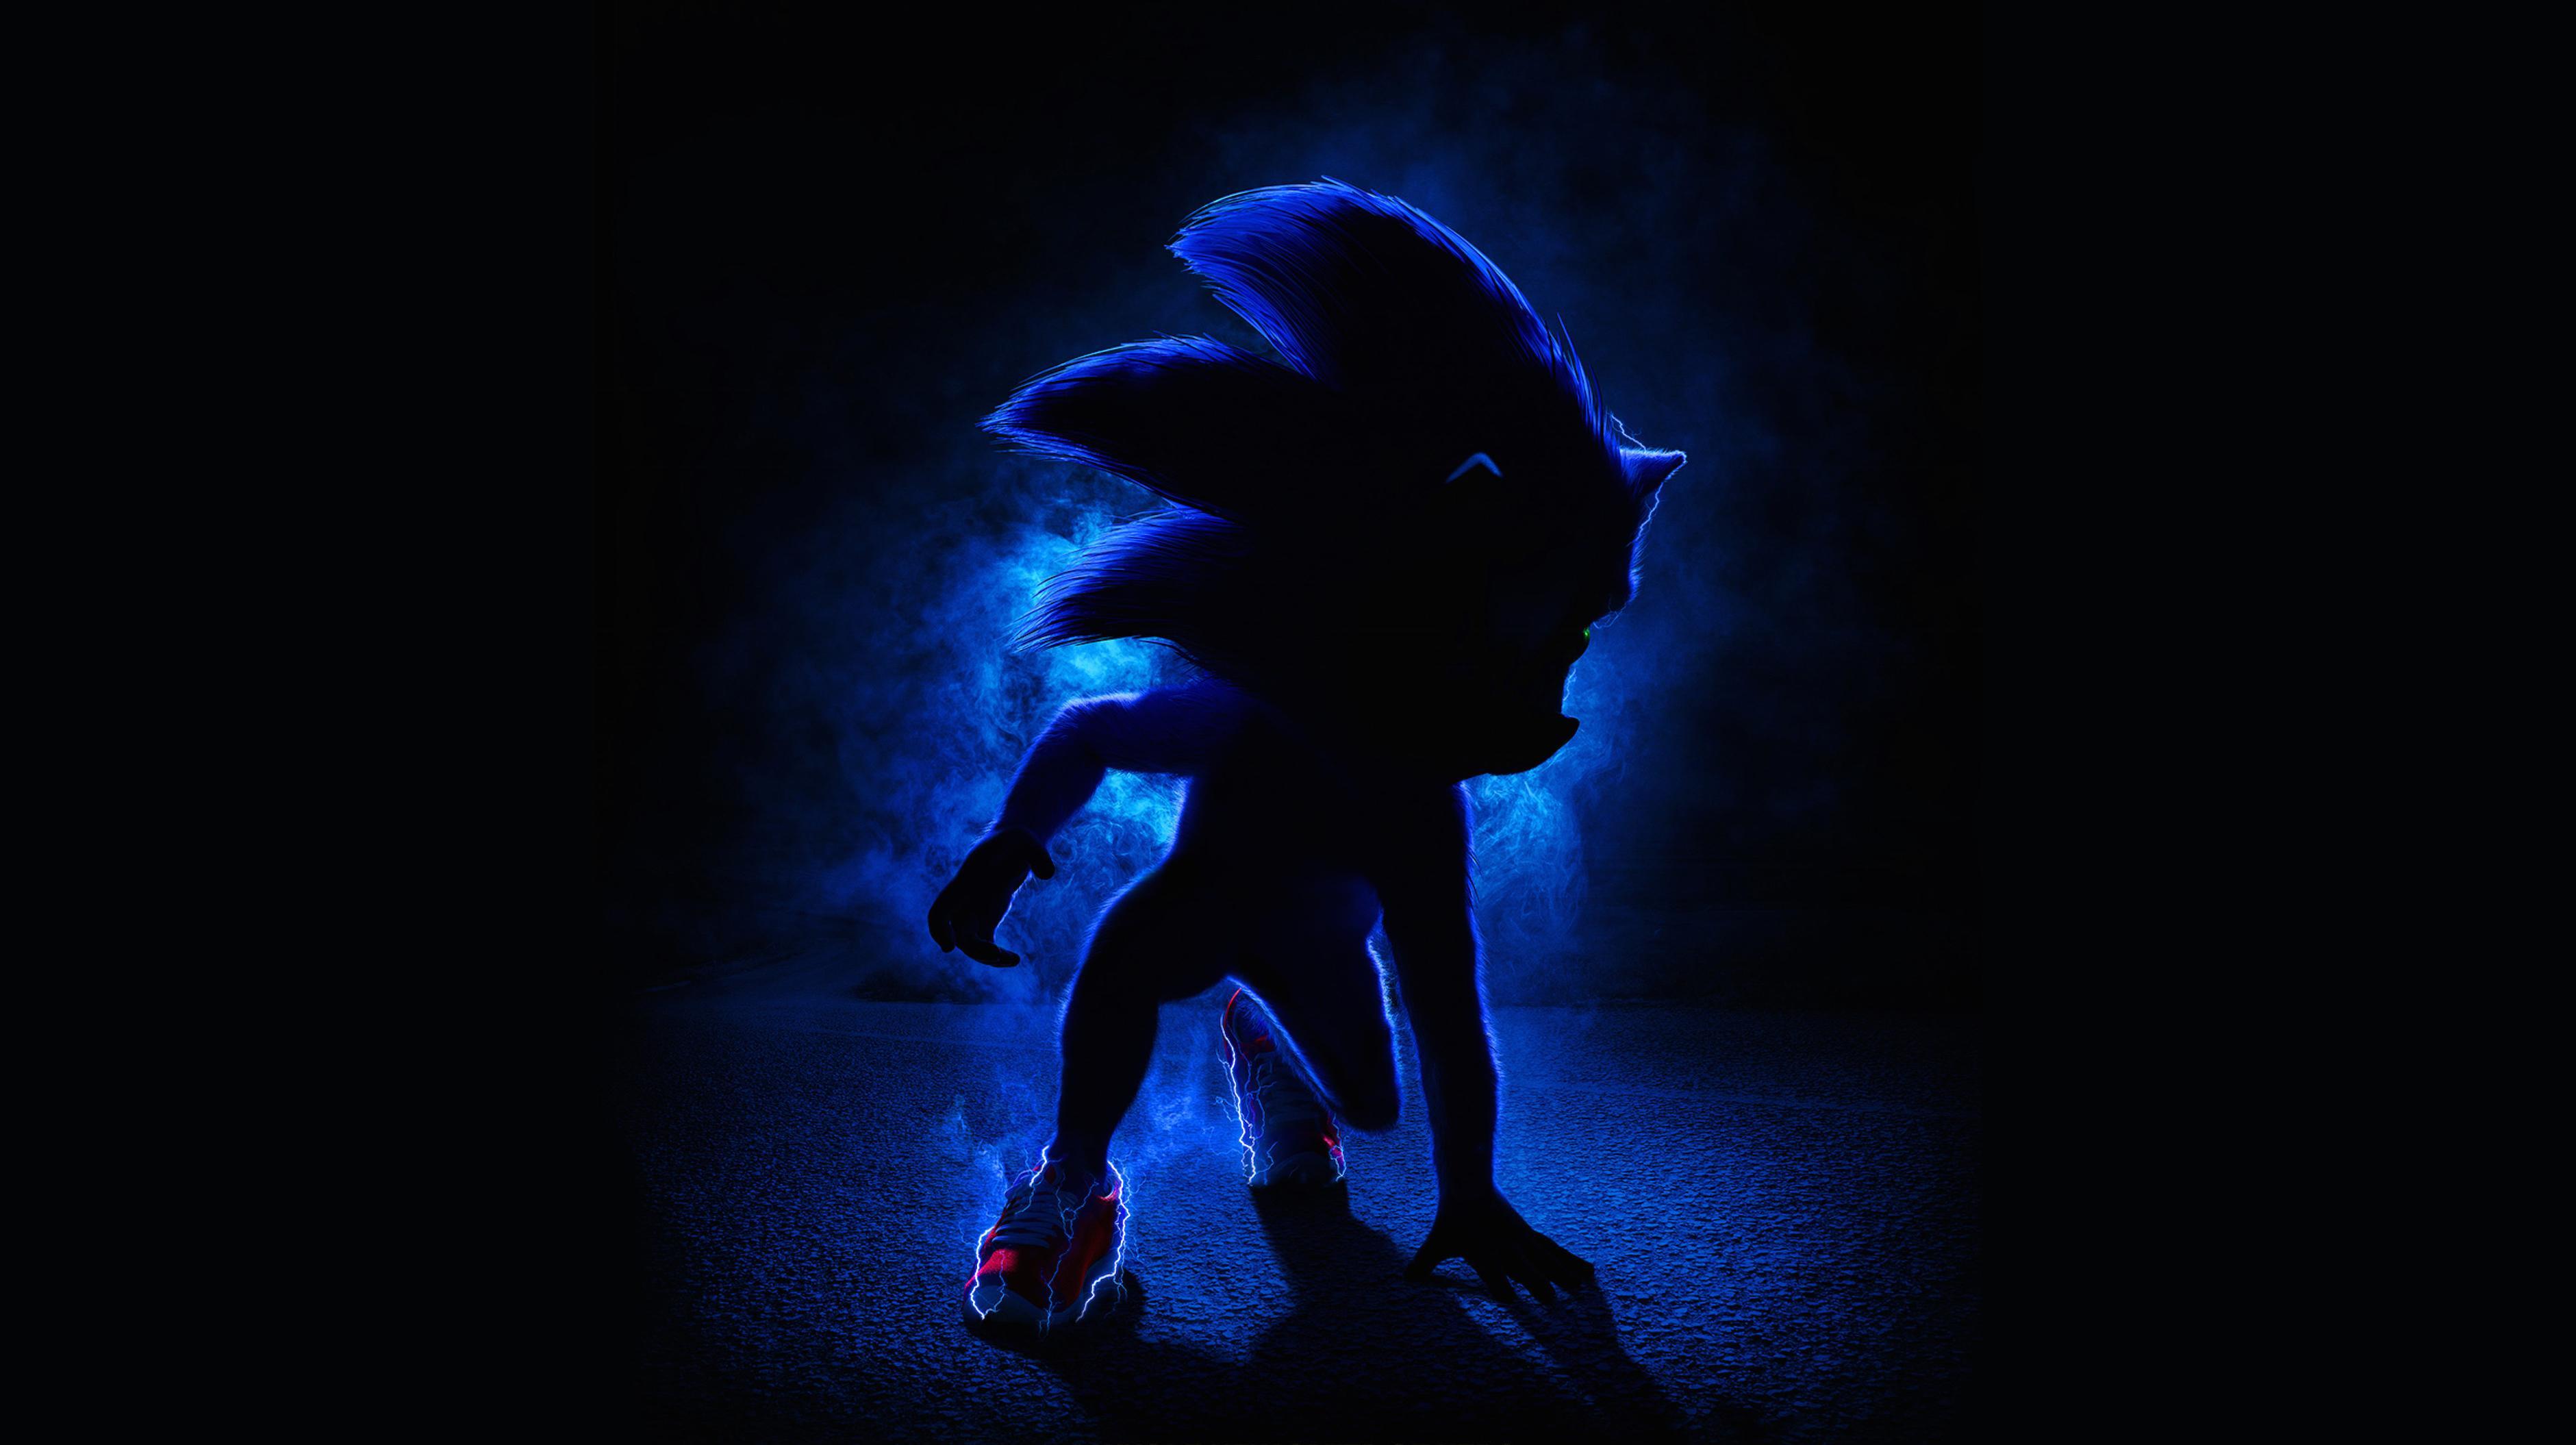 Sonic the Hedgehog 2019 Movie Poster Wallpaper, HD Movies 4K